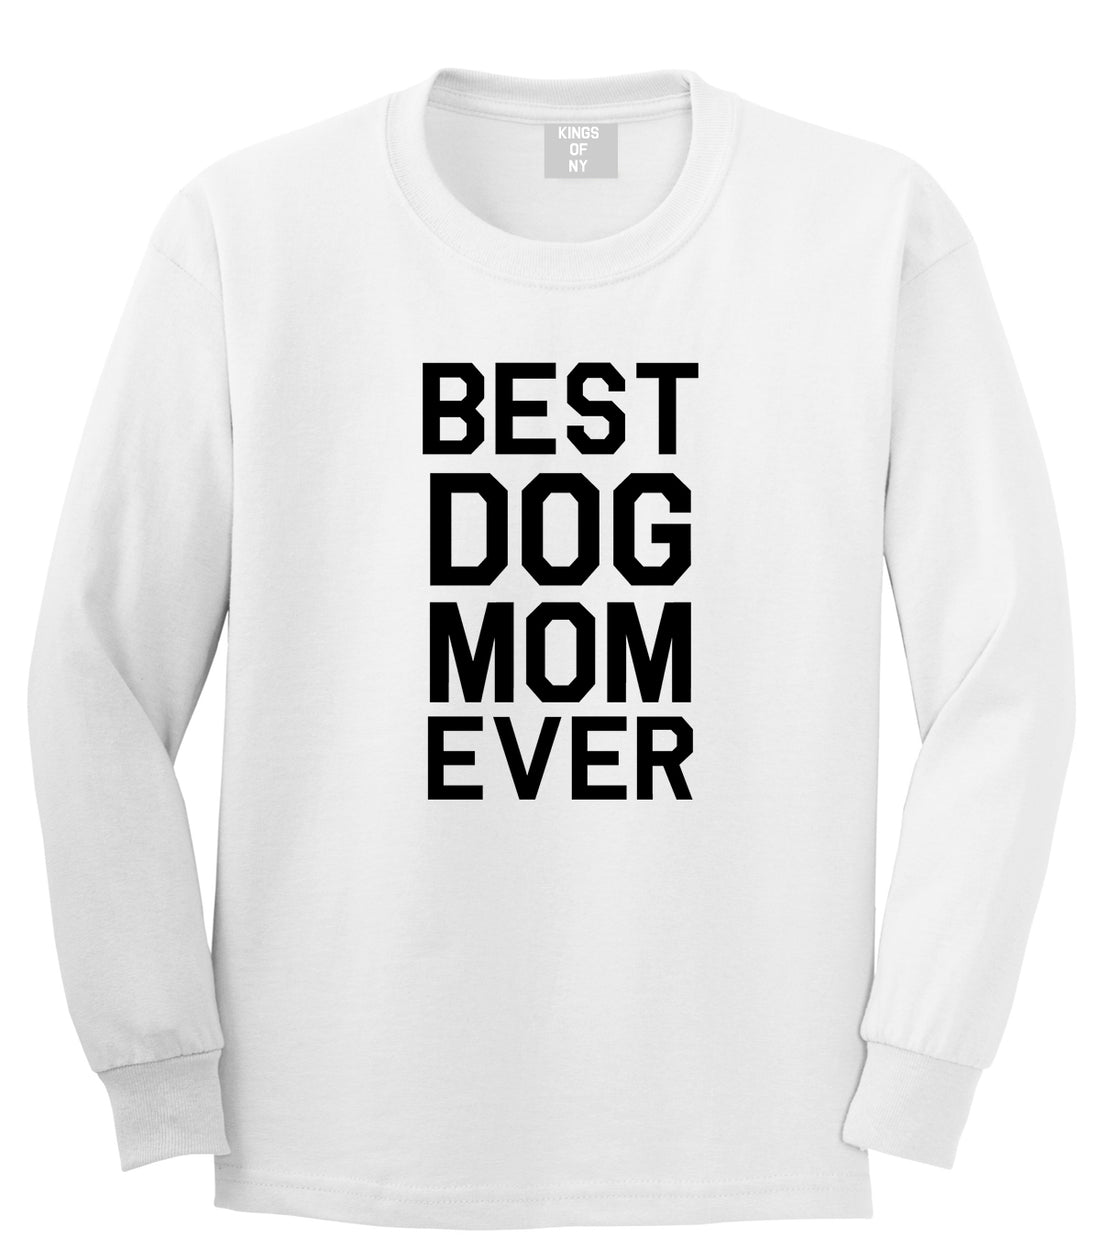 Best Dog Mom Ever Mens White Long Sleeve T-Shirt by Kings Of NY